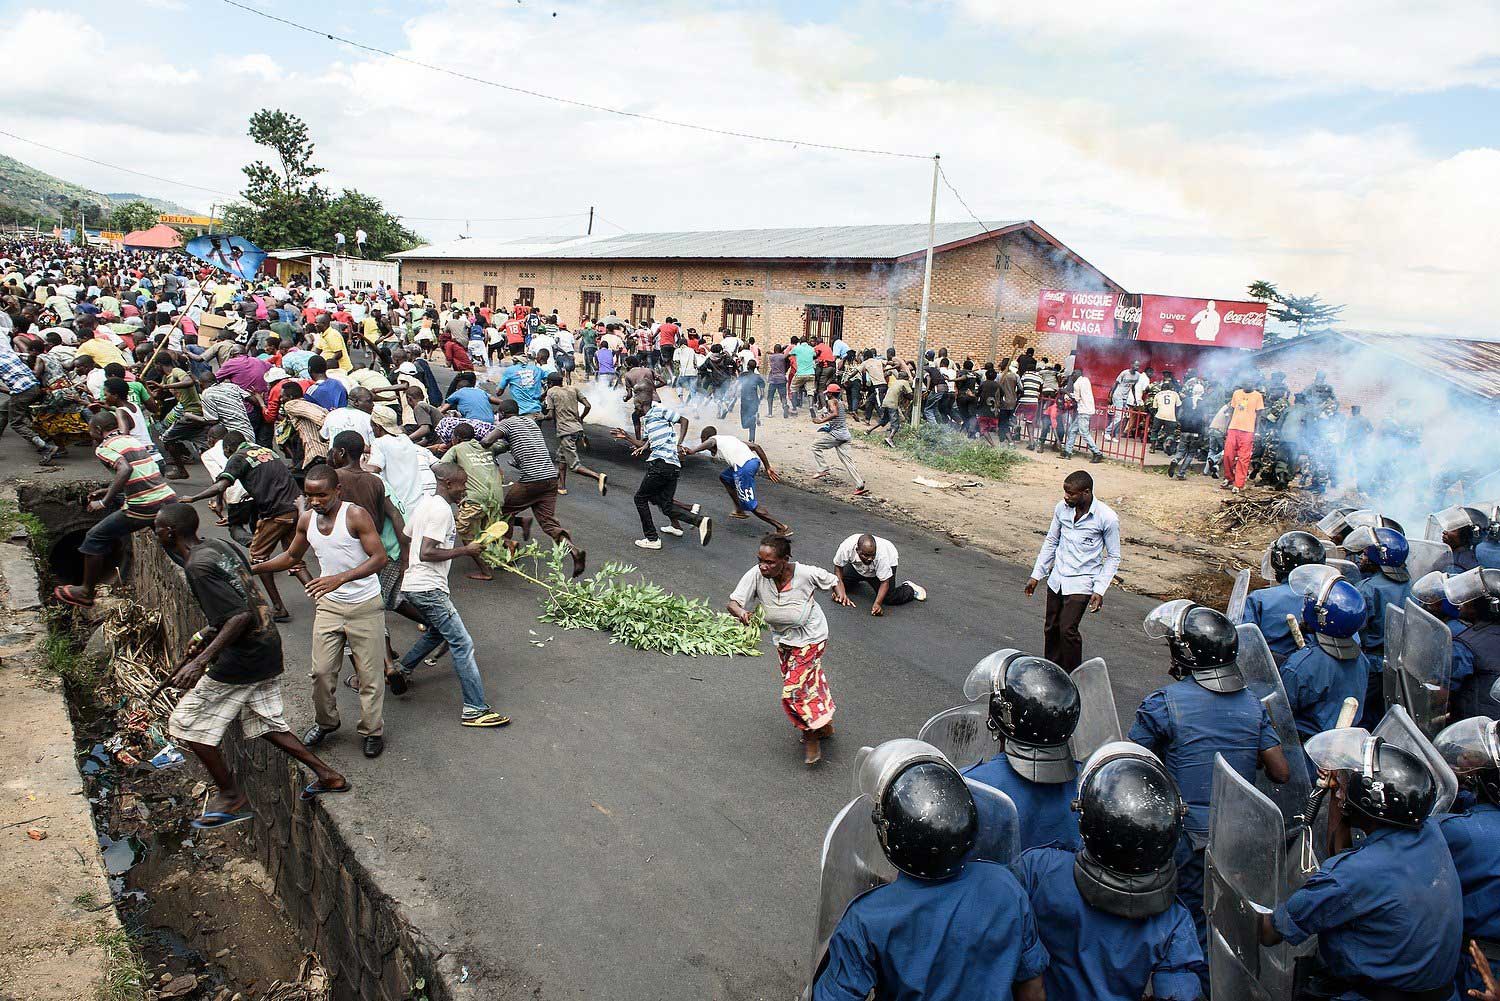 Burundi's policemen and army forces face protesters during a demonstration against incumbent President Pierre Nkurunziza's bid for a third term in Bujumbura, Burundi, on May 13, 2015.